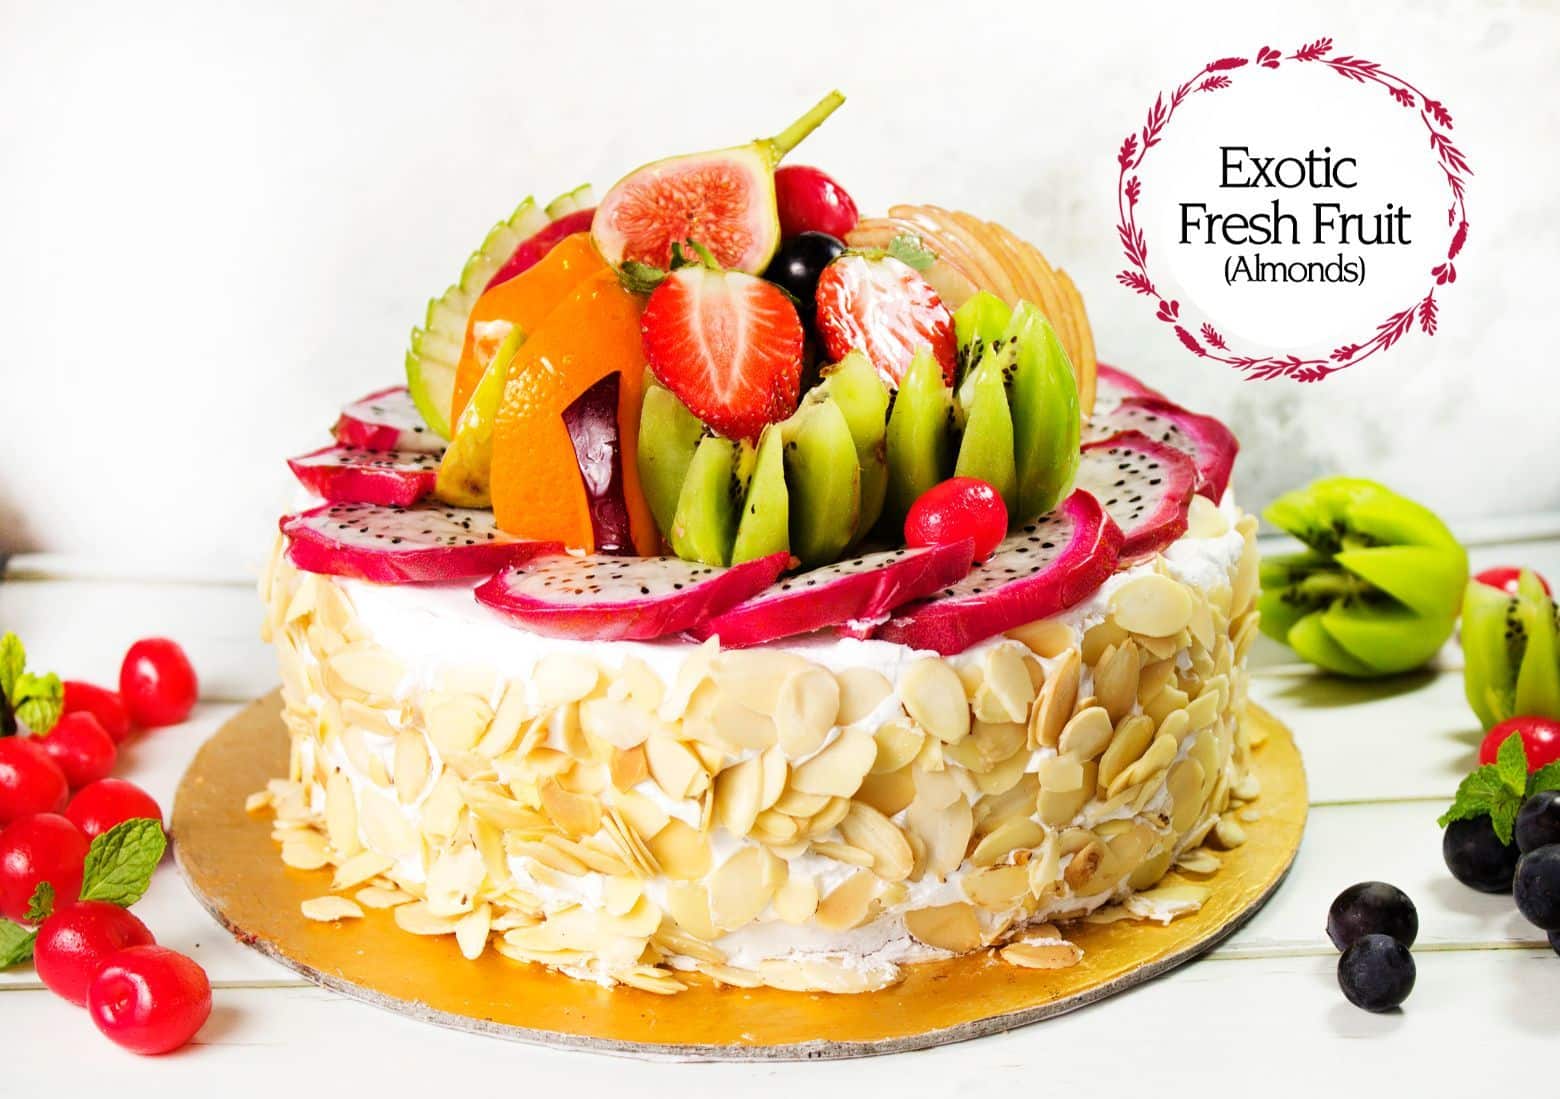 Send Cakes to India| Send Cakes to Hyderabad | Send Cakes from Karachi  Bakery